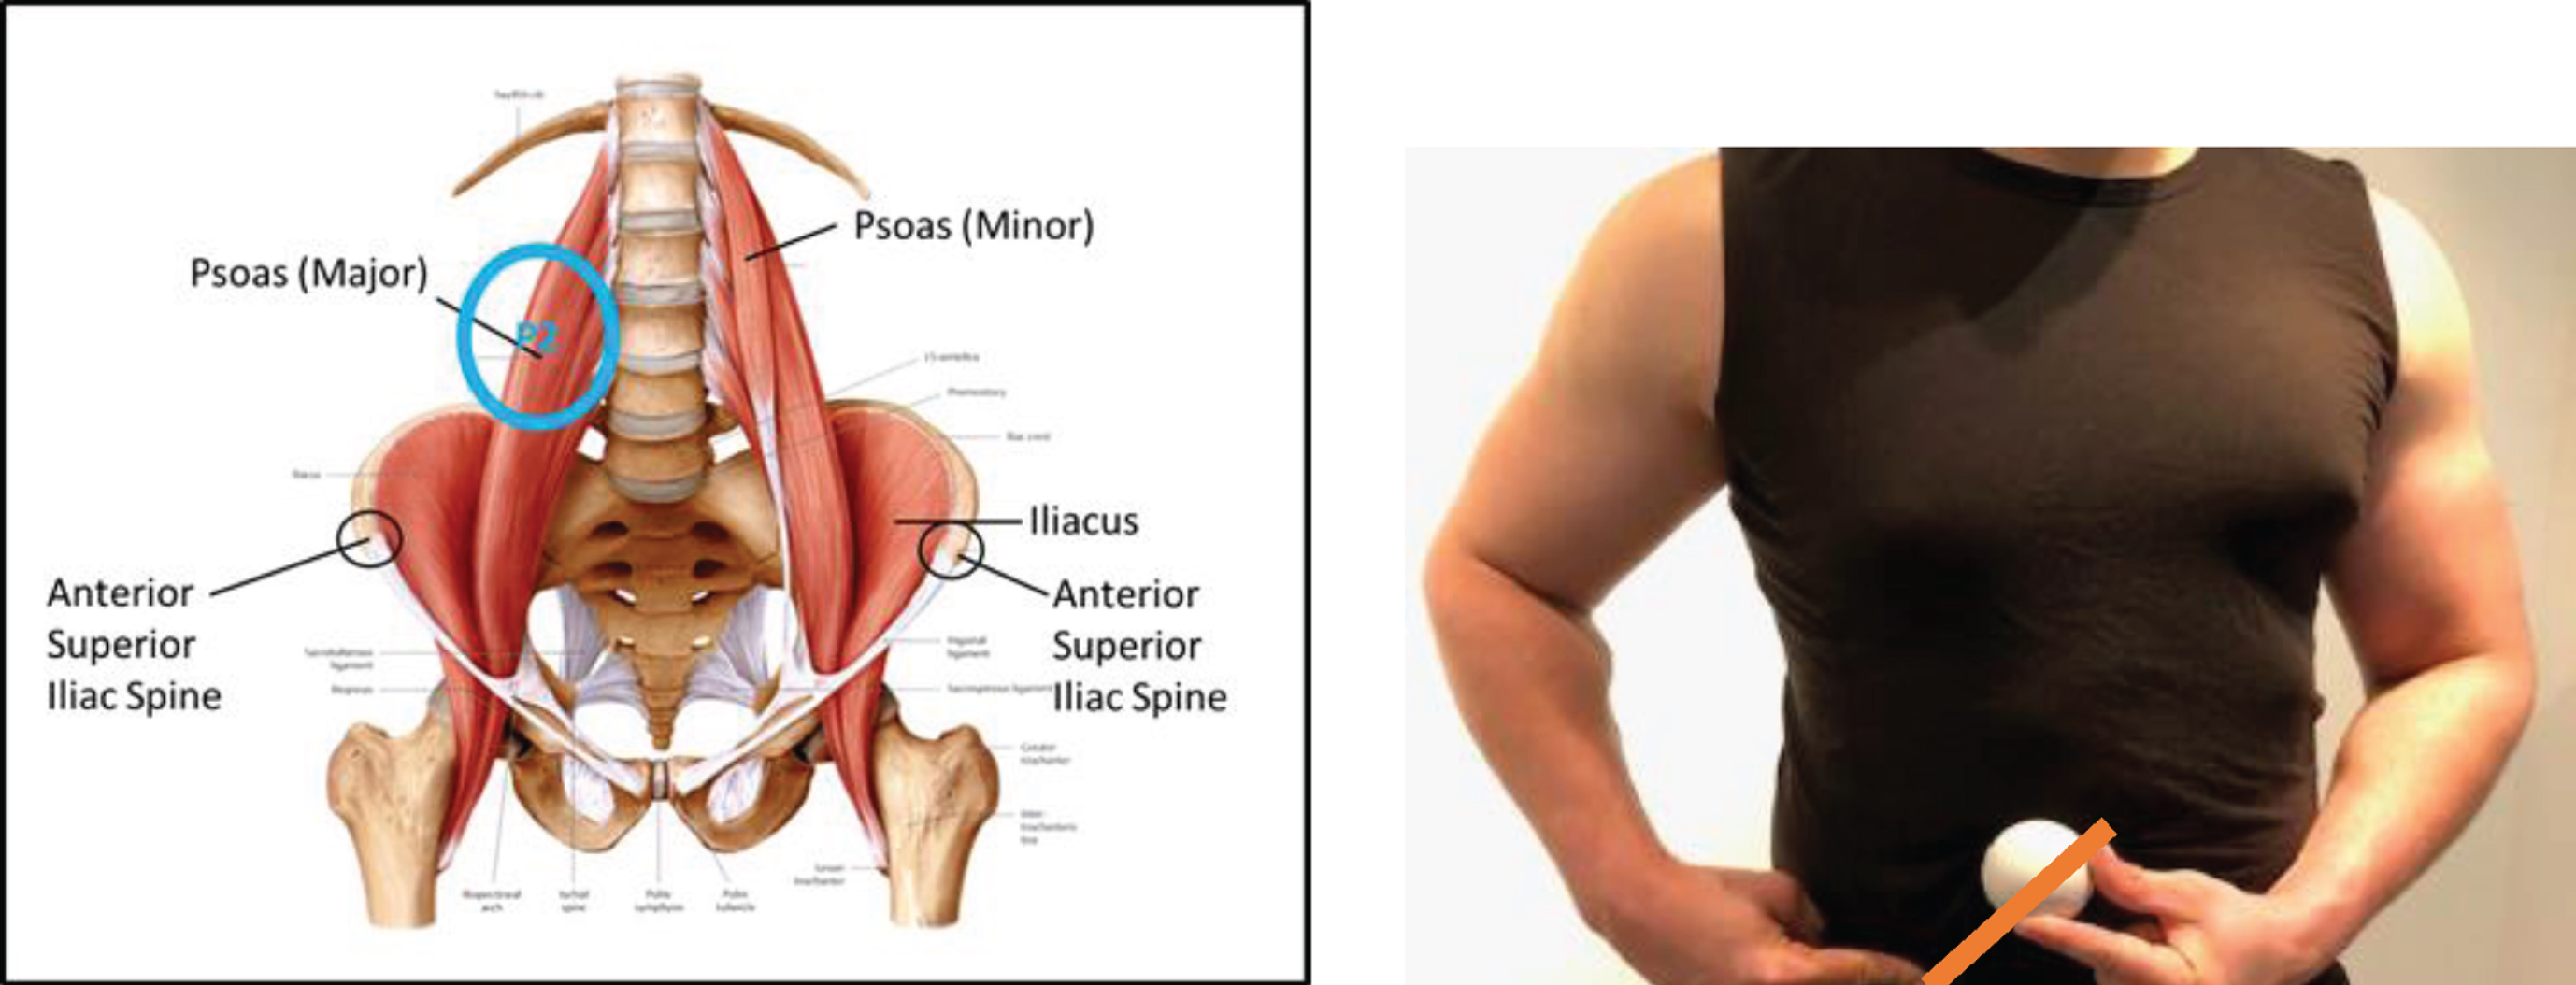 Spend two minutes at the psoas to target the major and minor muscles.